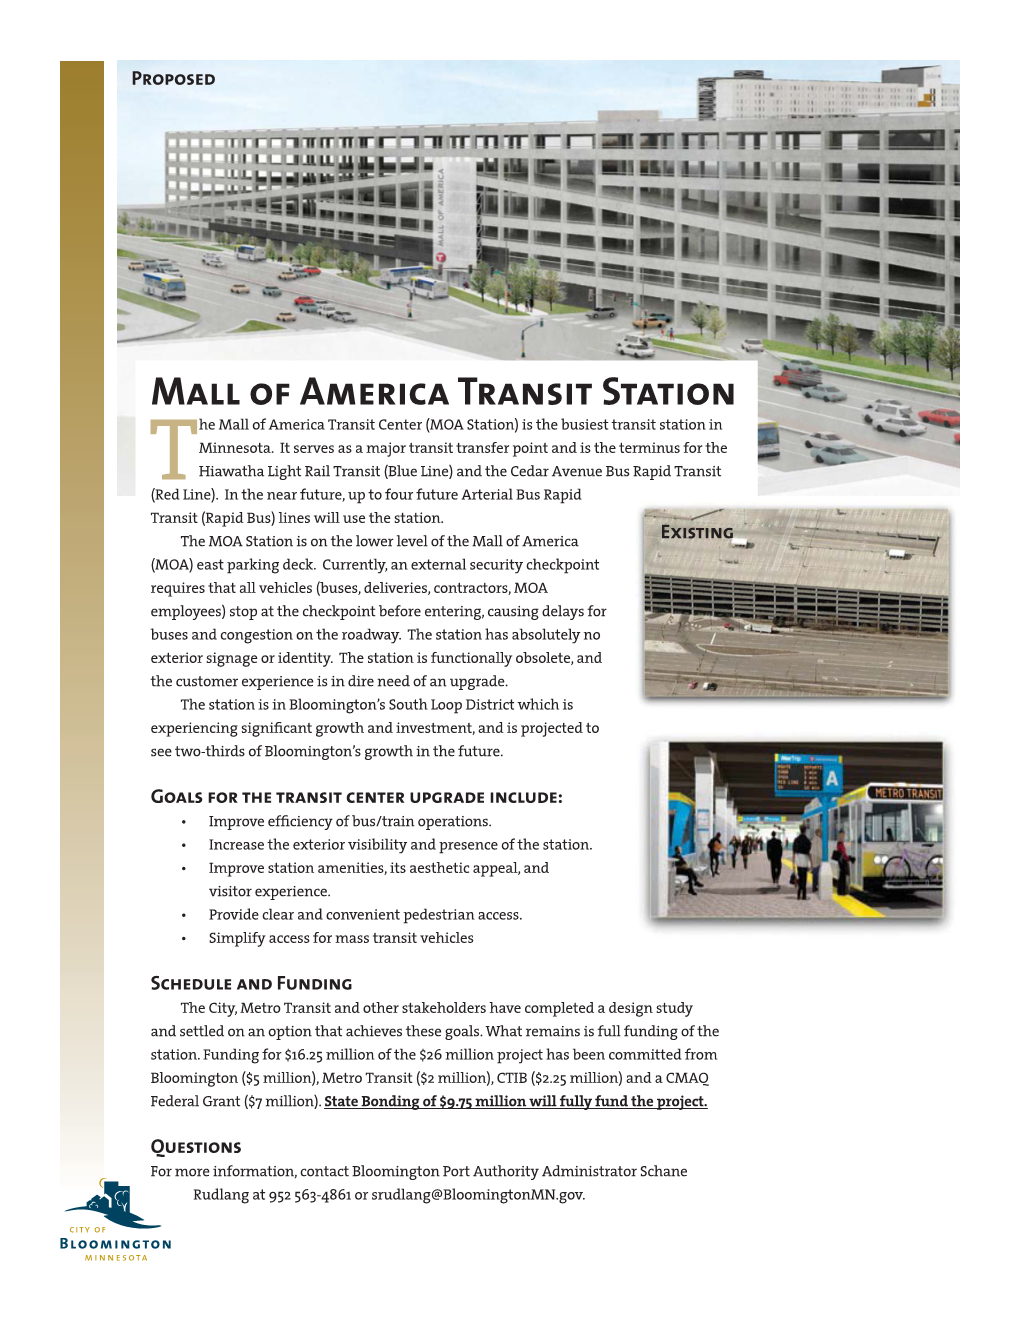 The Mall of America Transit Center (MOA Station)